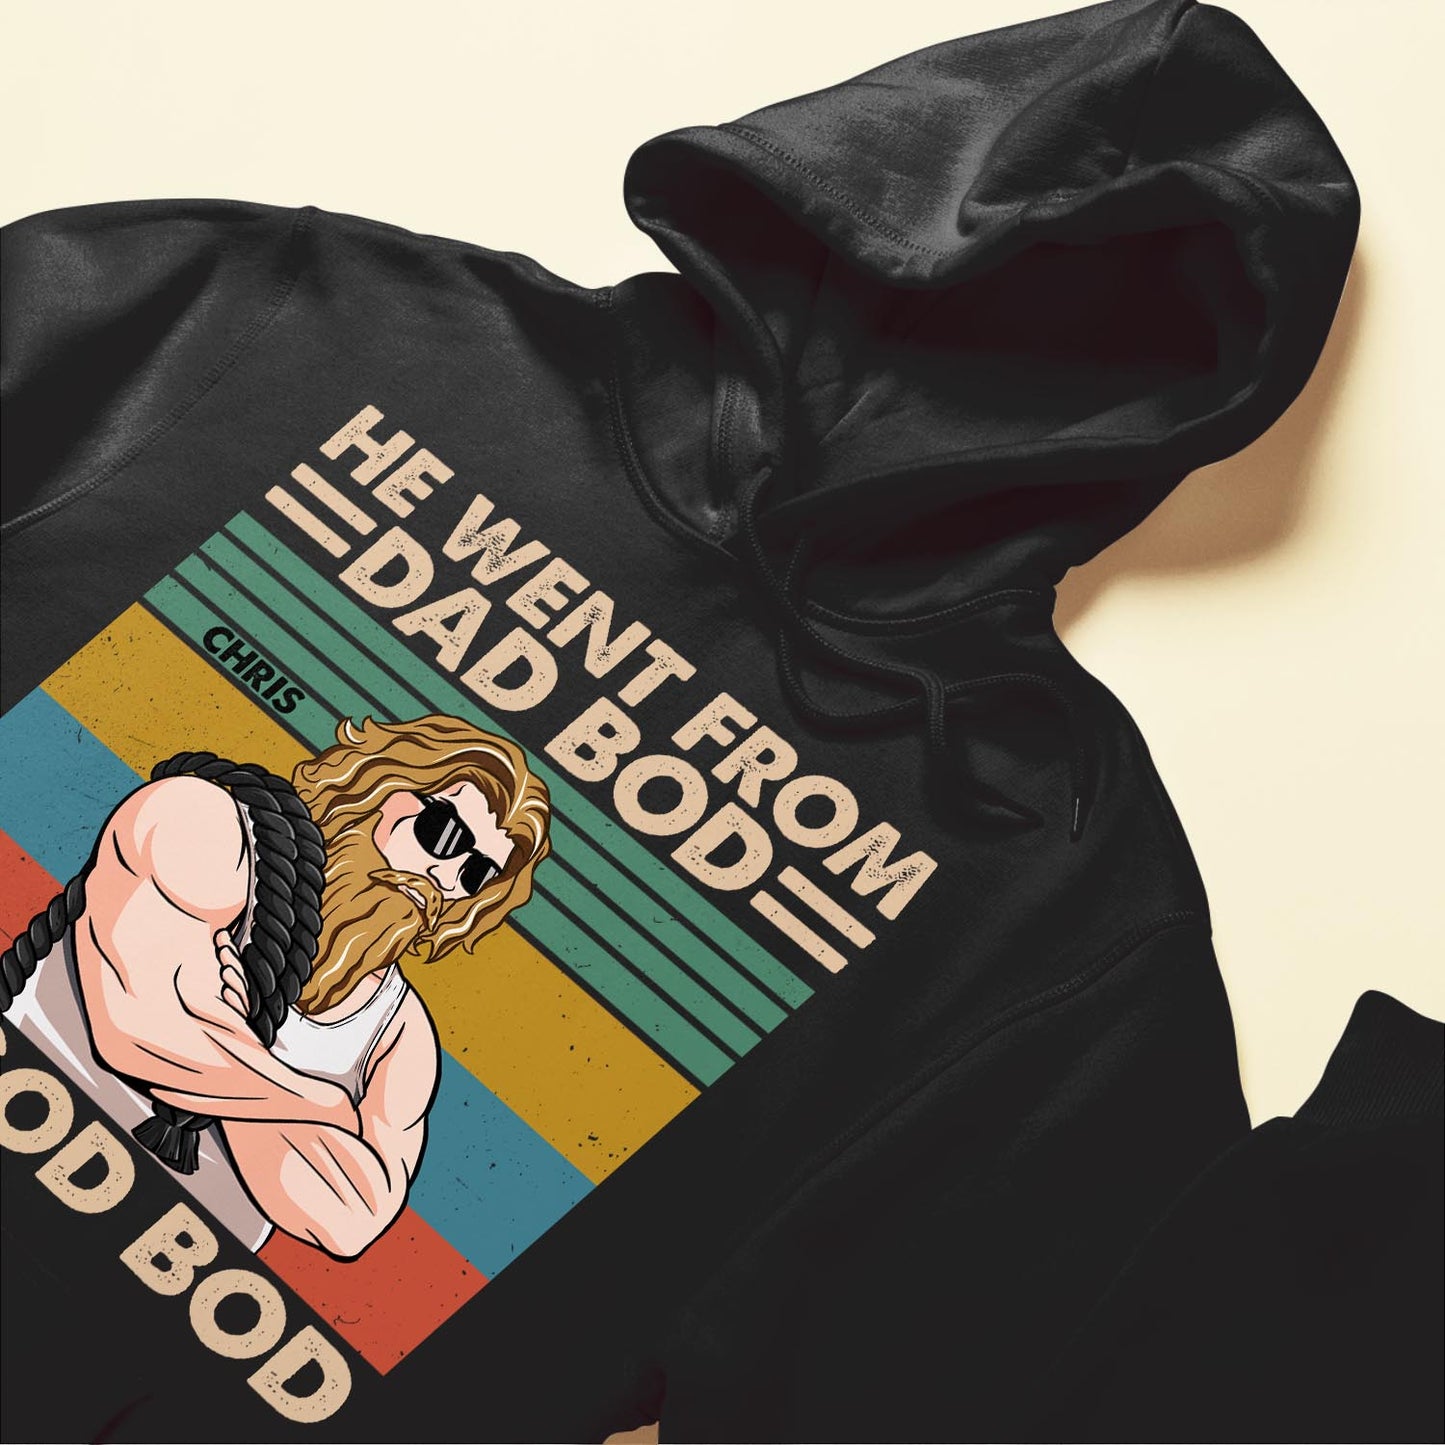 He Went From Dad Bod To God Bod - Personalized Shirt - Father's Day, Birthday, Funny  Gift For Dad, Father, Him, Gym Dad, Gym Lover